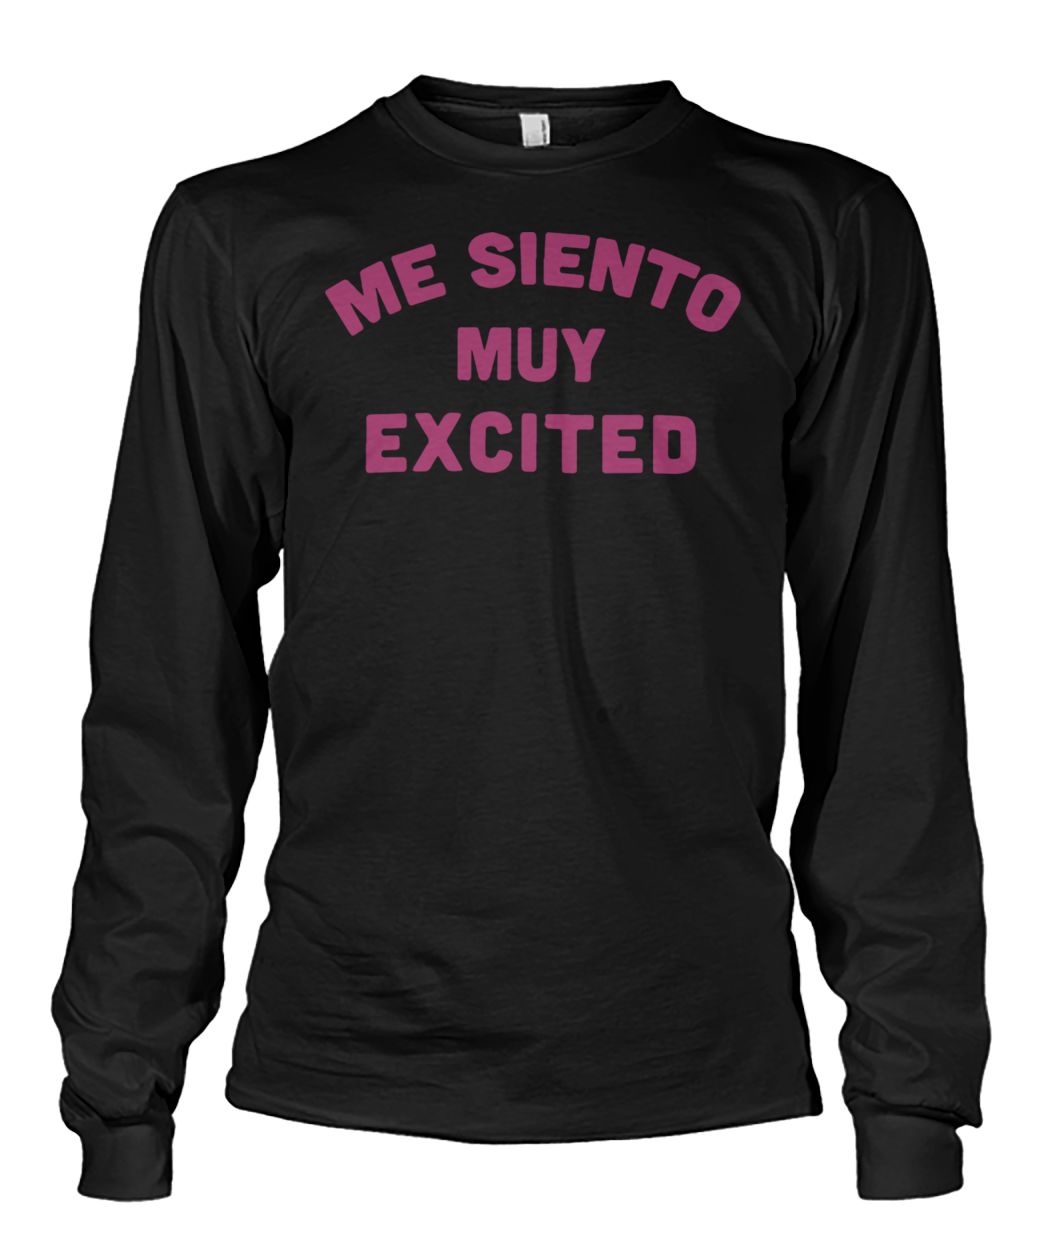 Me siento muy excited unisex long sleeve